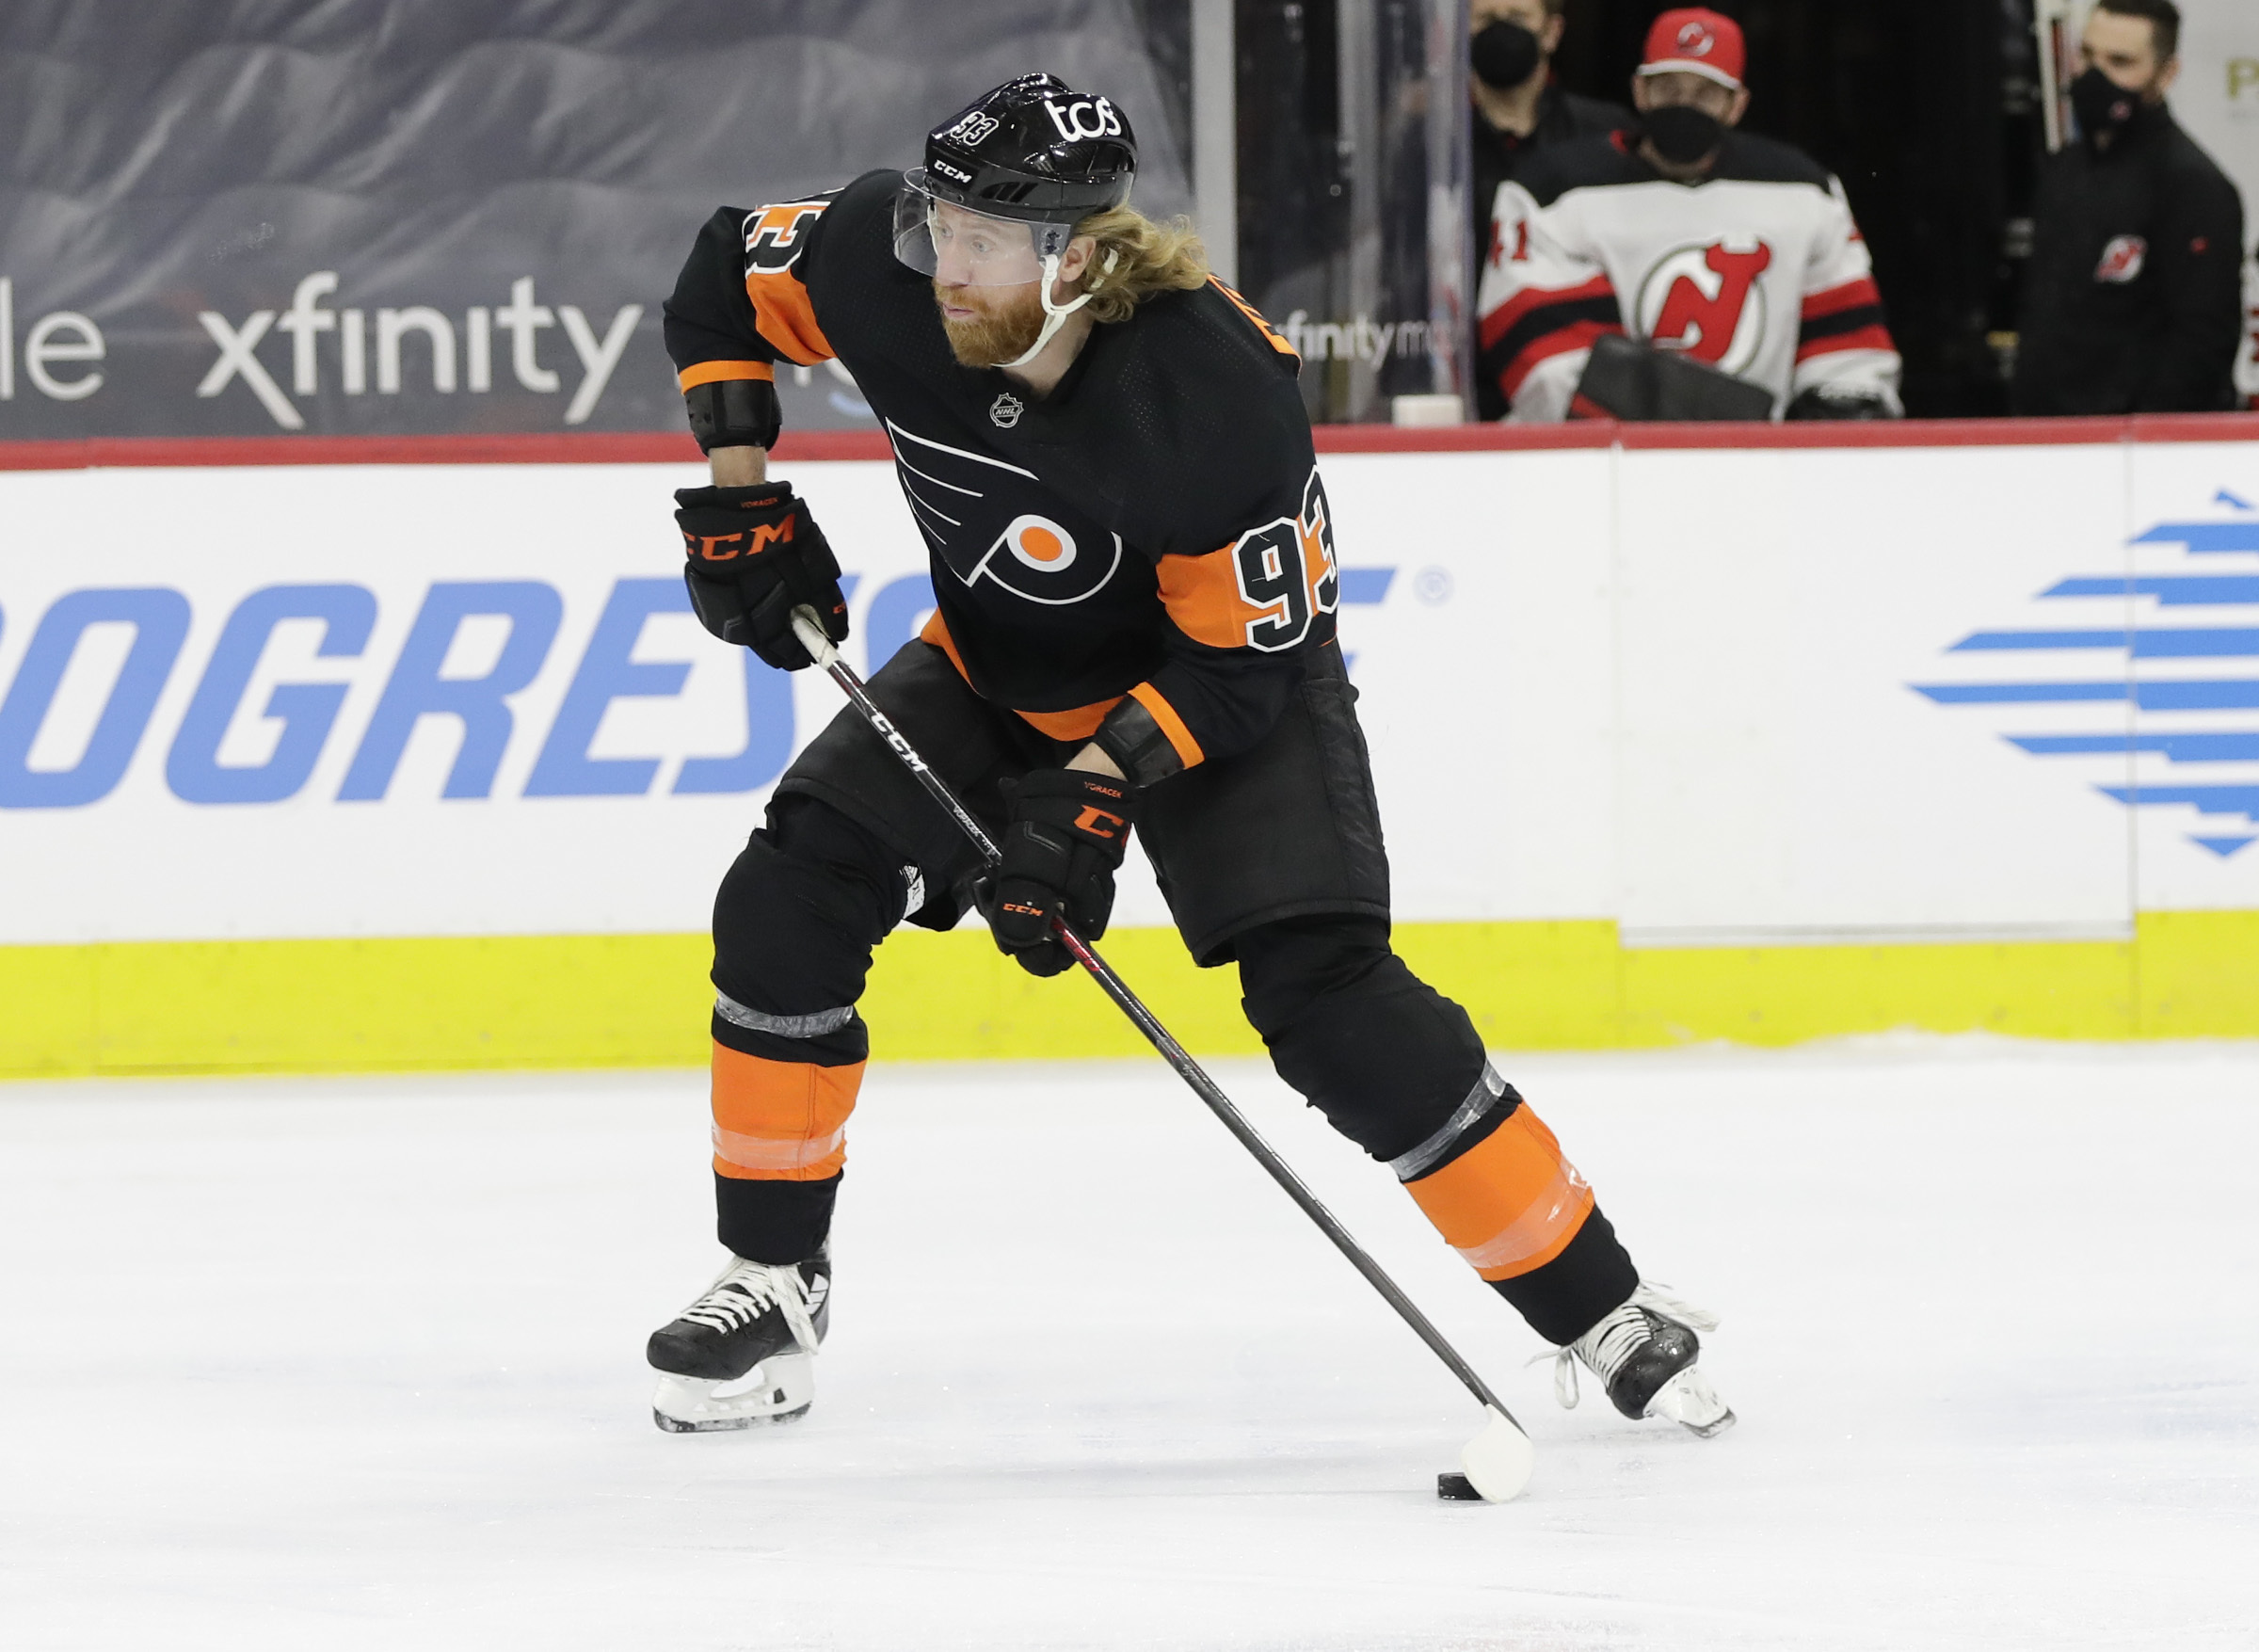 Jake Voracek's long stand-up act for Flyers ends in swap for